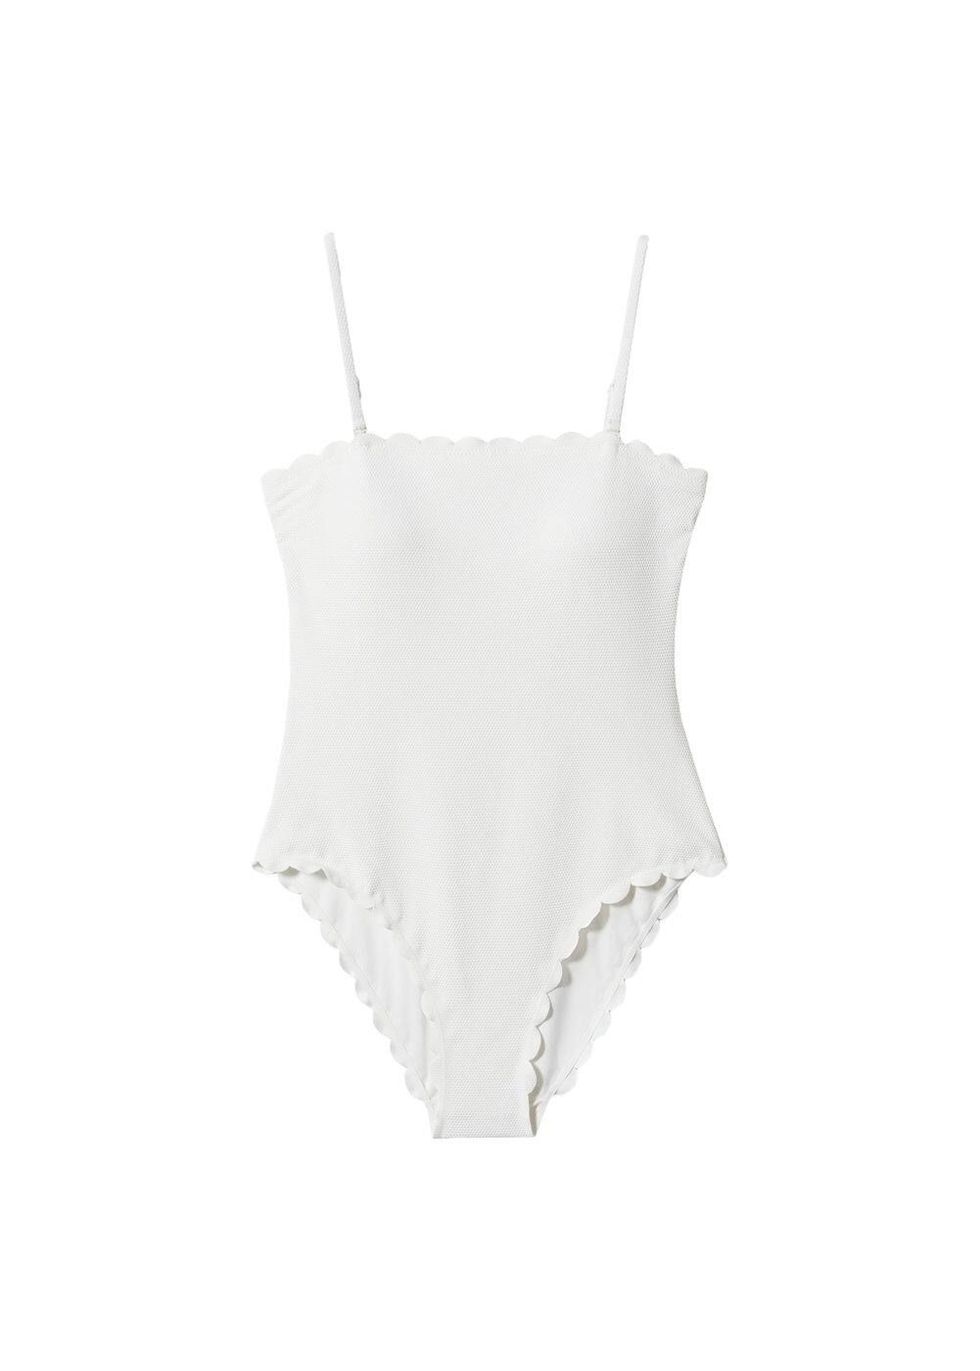 Scallop-textured swimsuit